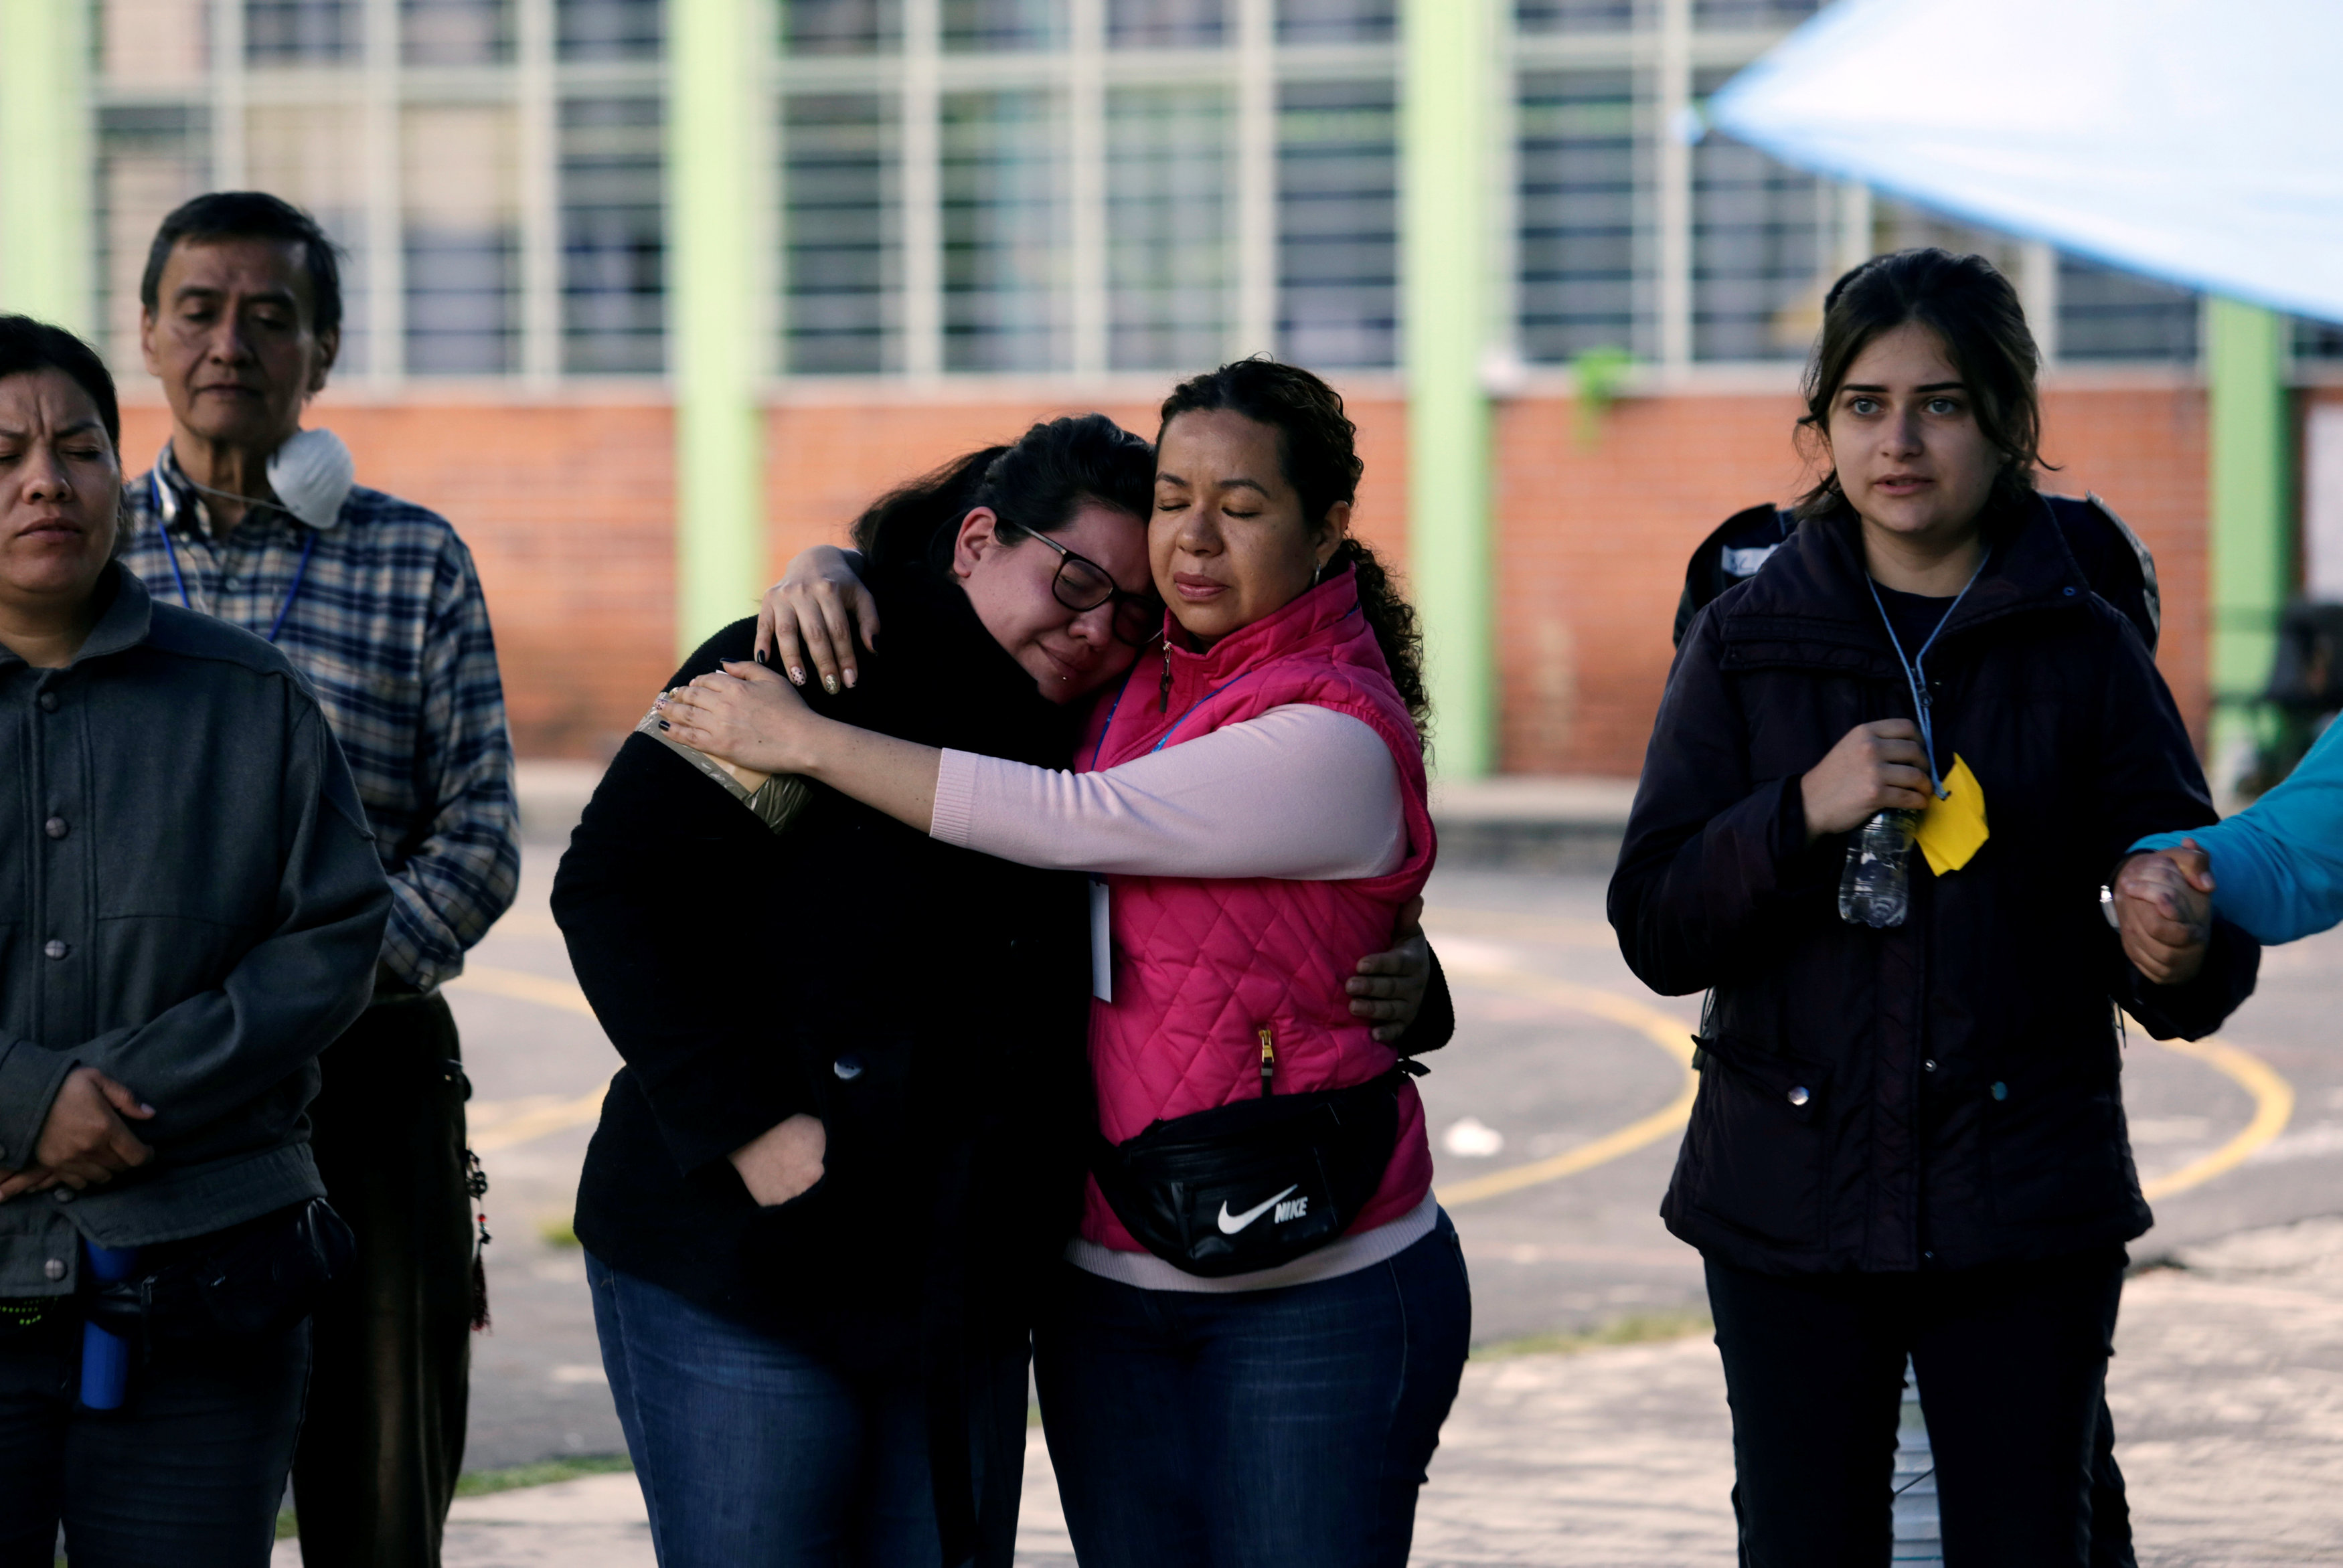 People who are living in a shelter because their homes were damaged in an earthquake, are united in a prayer after a tremor was felt in Mexico City